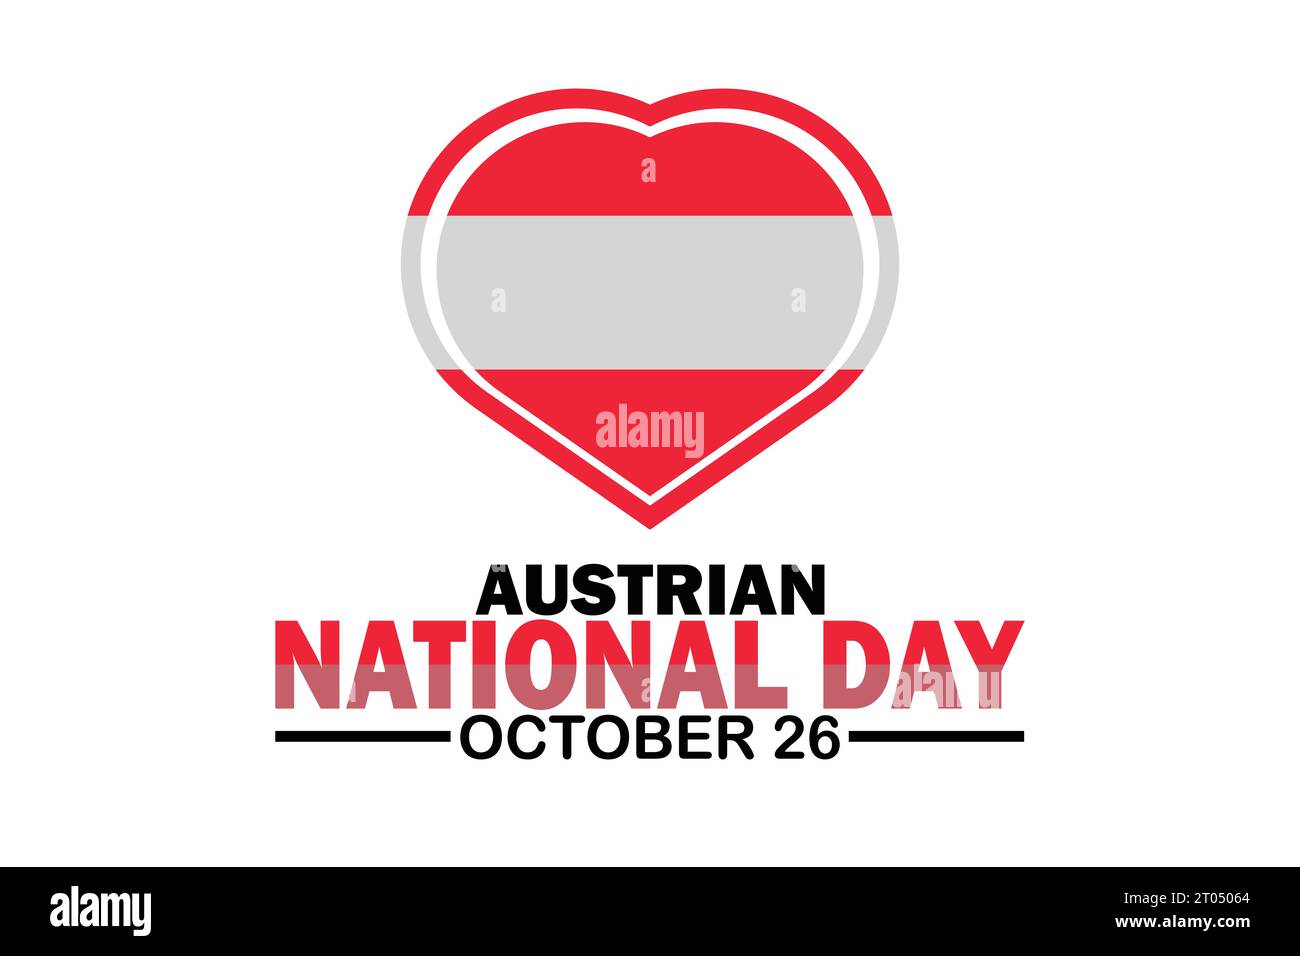 Austrian National Day Vector Template Design Illustration. October 26. Suitable for greeting card, poster and banner Stock Vector